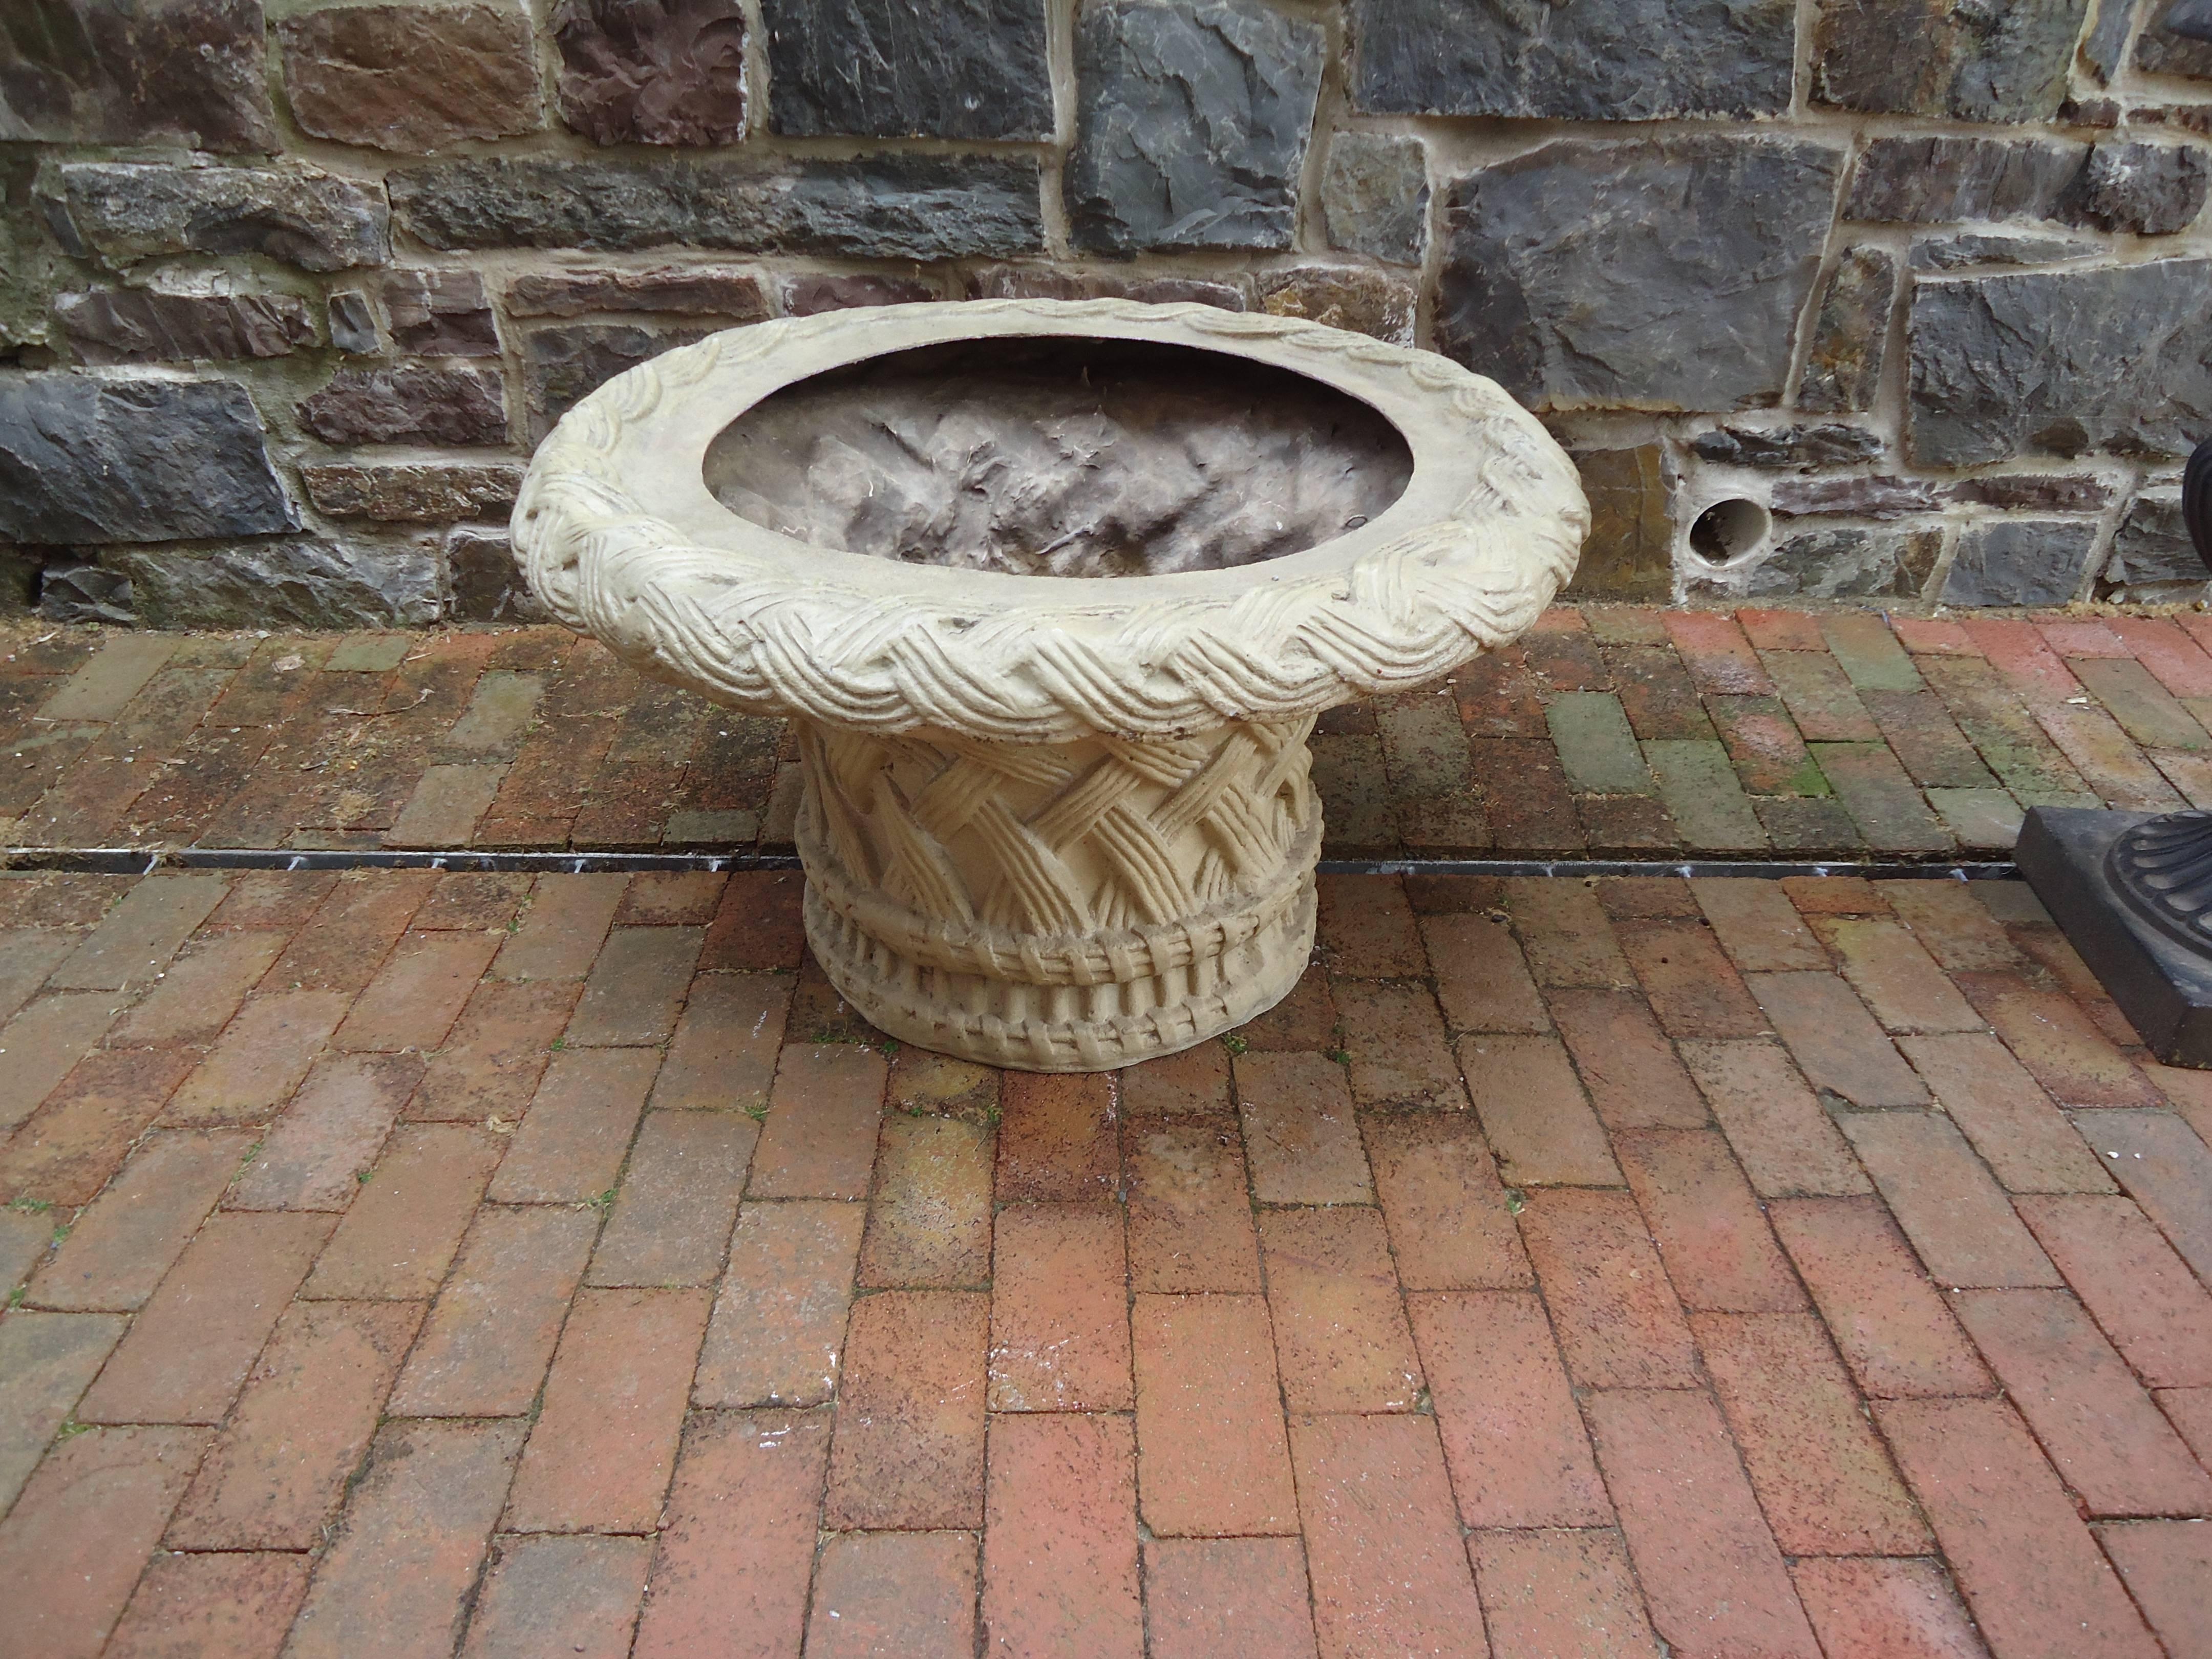 Large fiberglass resin basketweave motiffe planter or coffee table base, hand cast with a latex mold from an original antique planter, having intricate detail and a hand-painted faux limestone finish. This high quality medium is impervious to